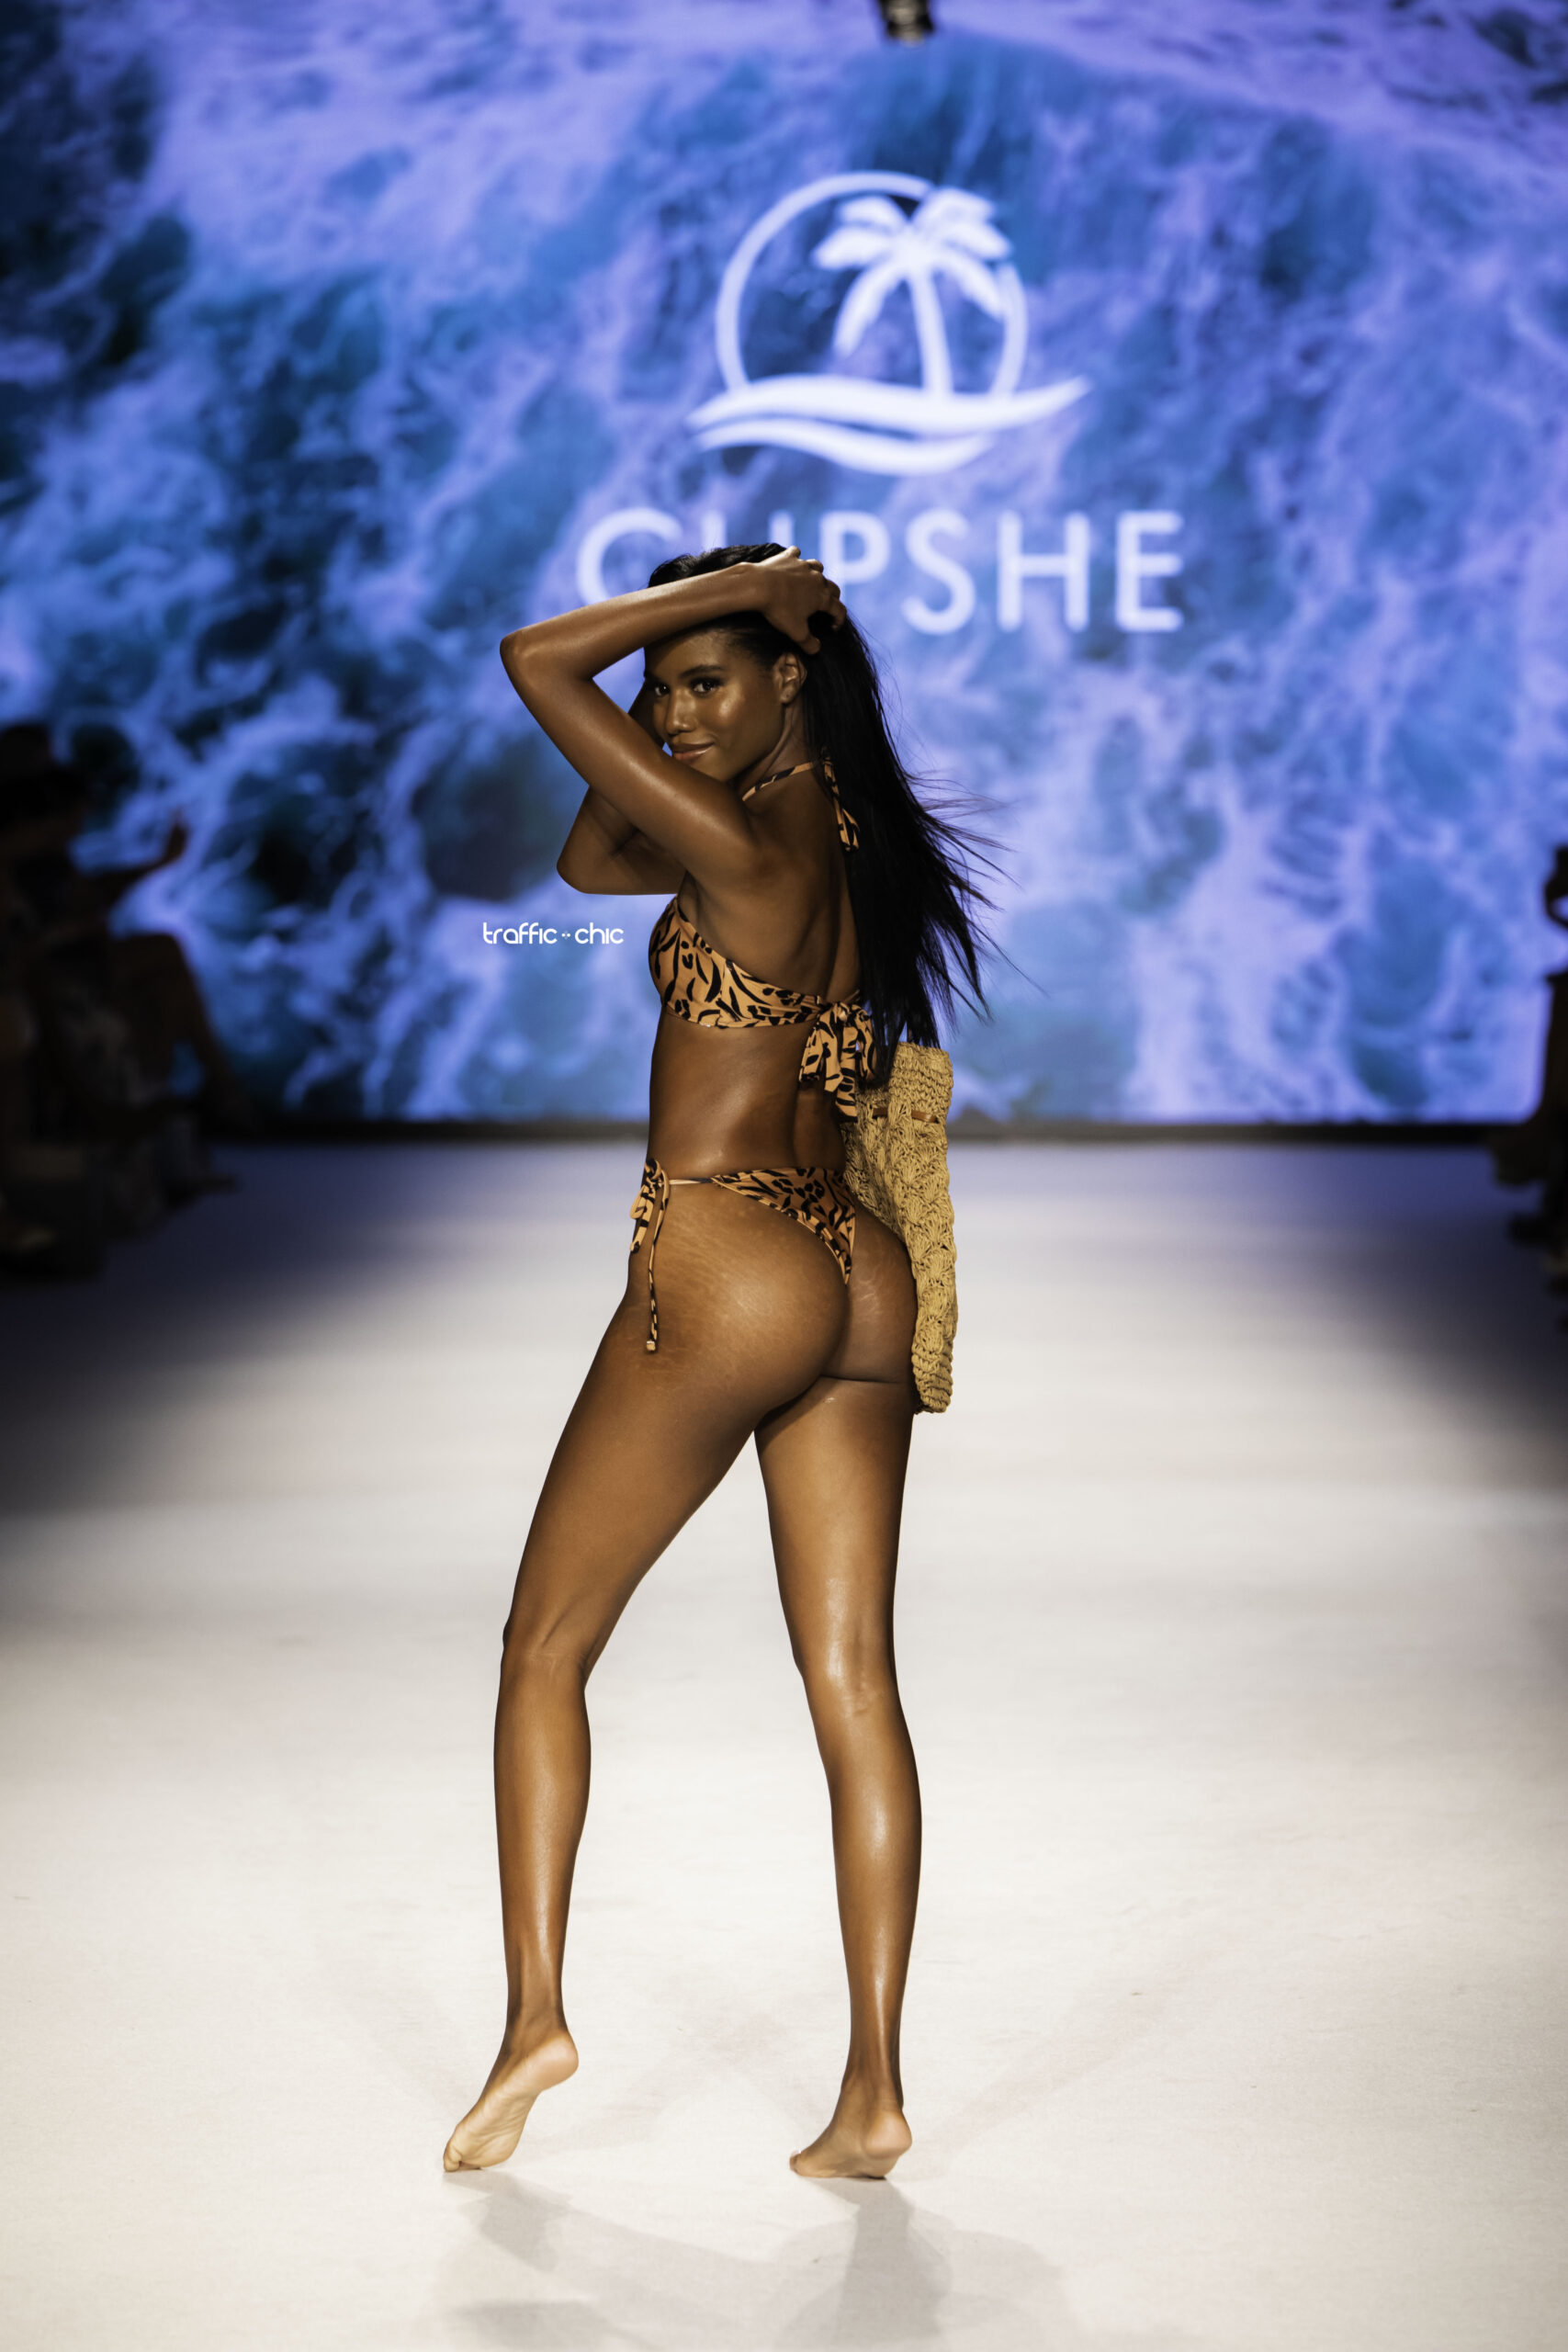 Cupshe runway show at Paraiso Miami Beach - Photo by Michael Ferrer for TRAFFIC CHIC